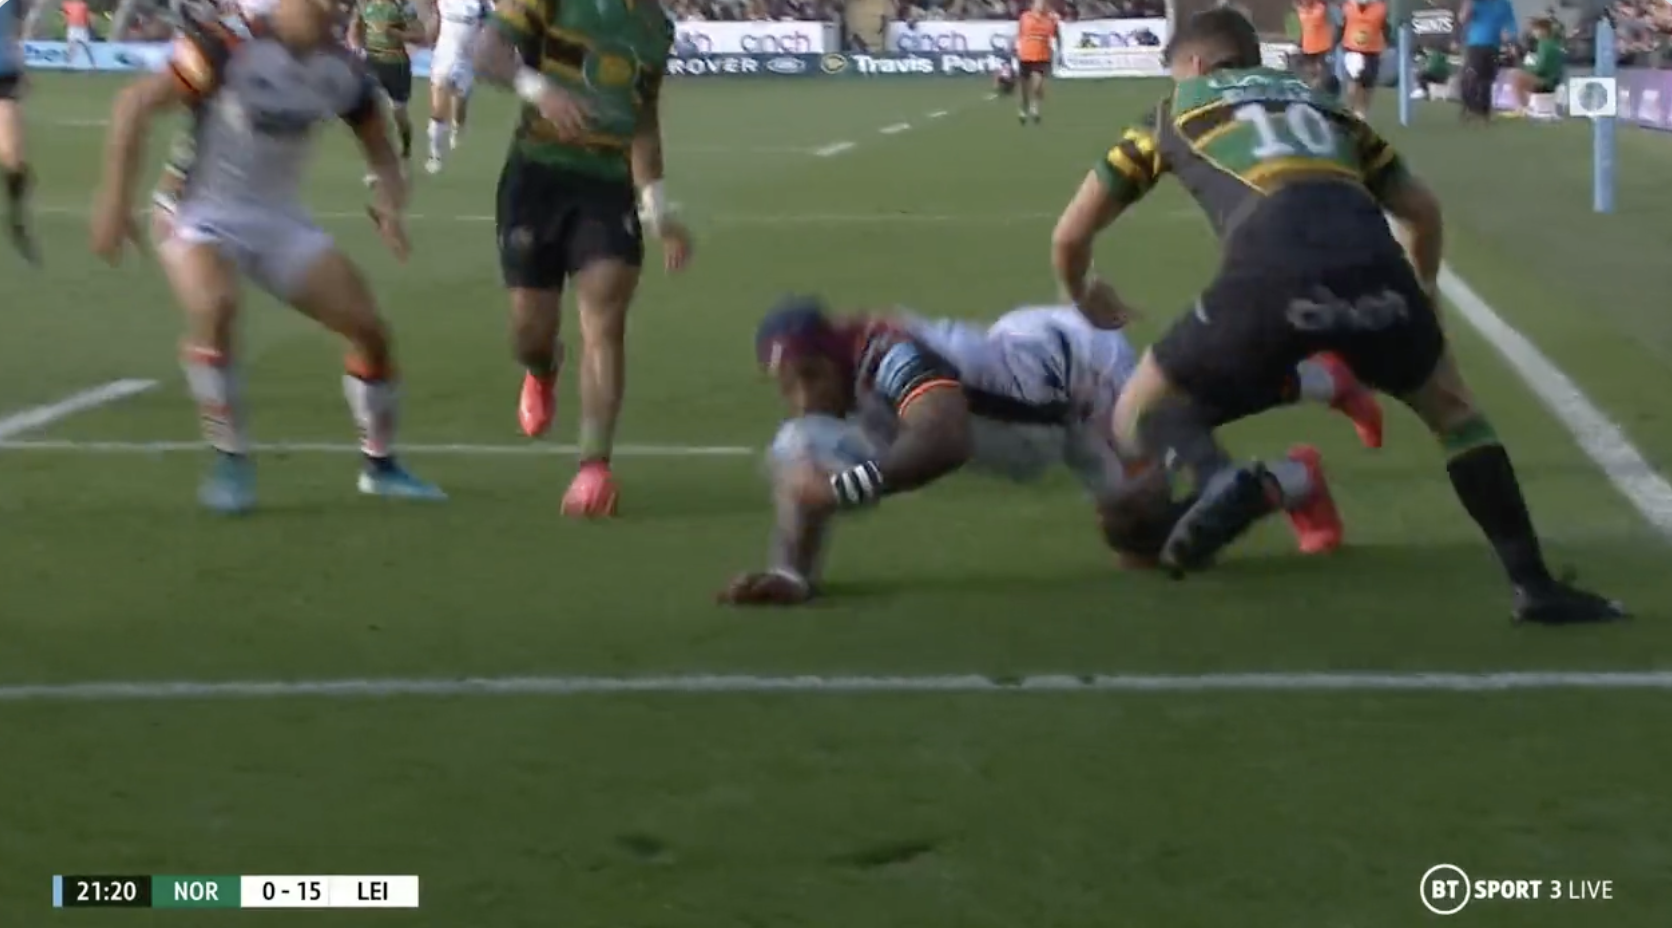 125kg Nemani Nadolo collapses in terror of fly-half charging at him